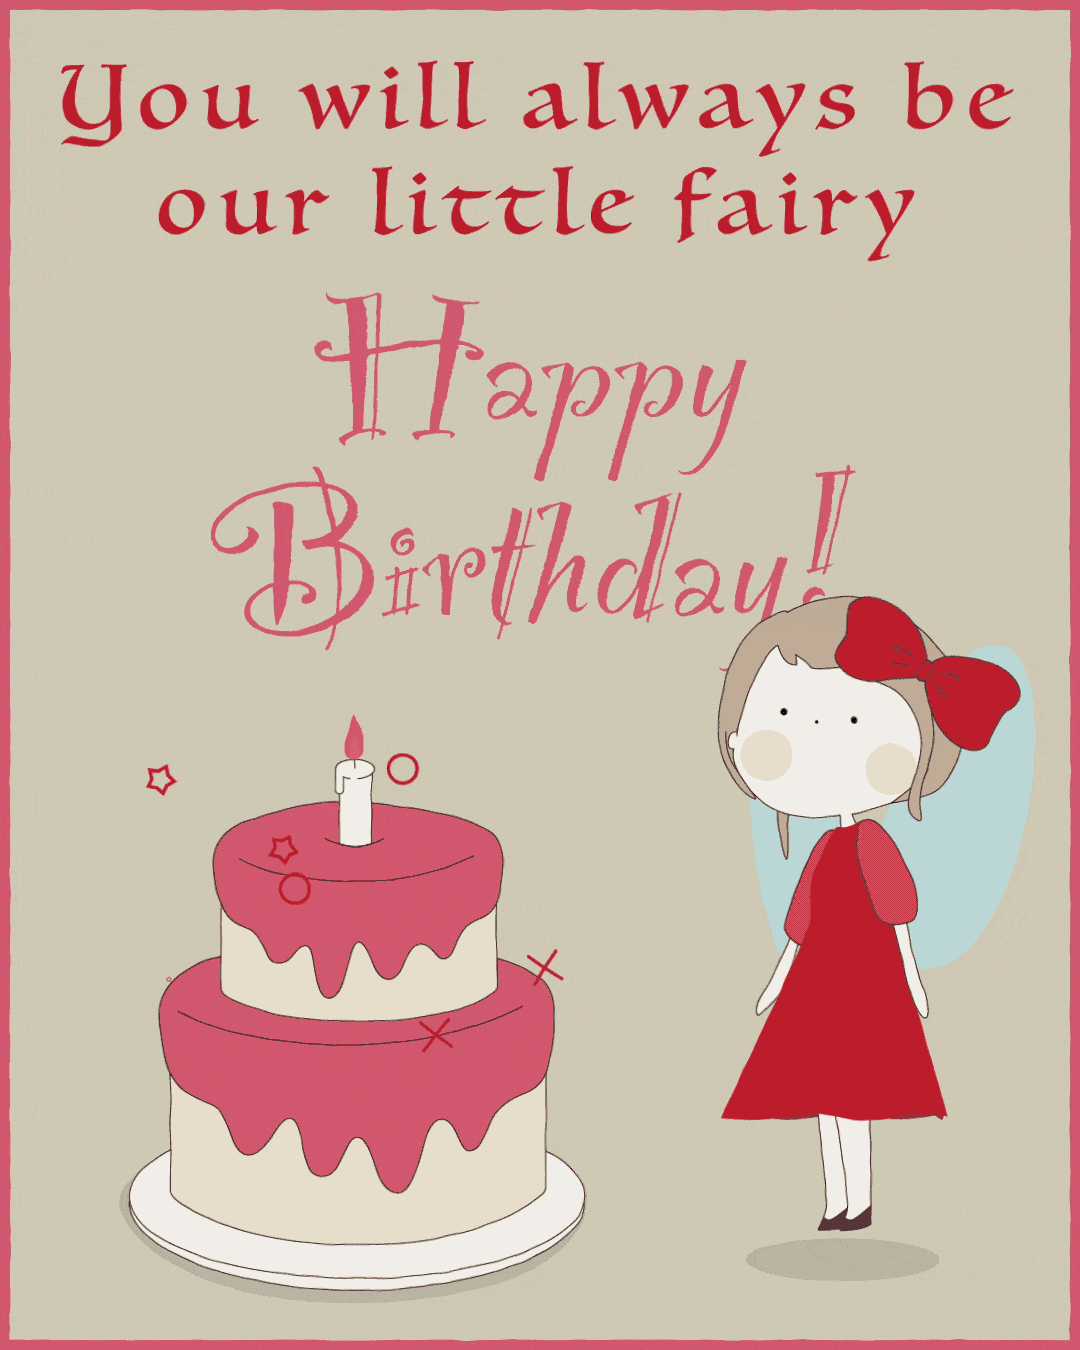 Free Happy Birthday Animated Images and GIFs for Daughter ...